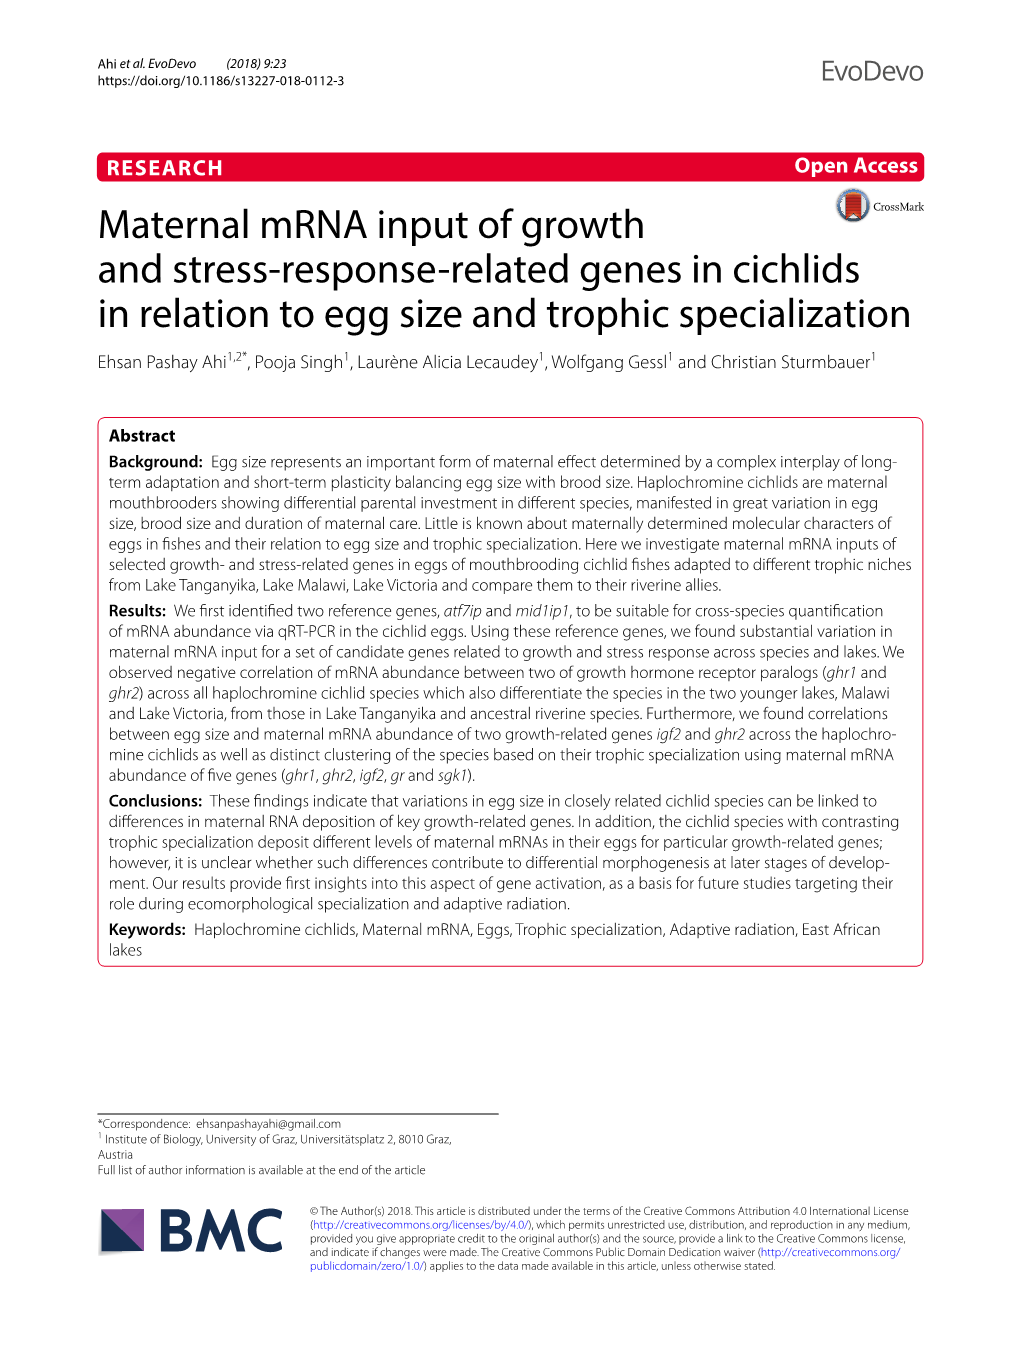 Maternal Mrna Input of Growth and Stress-Response-Related